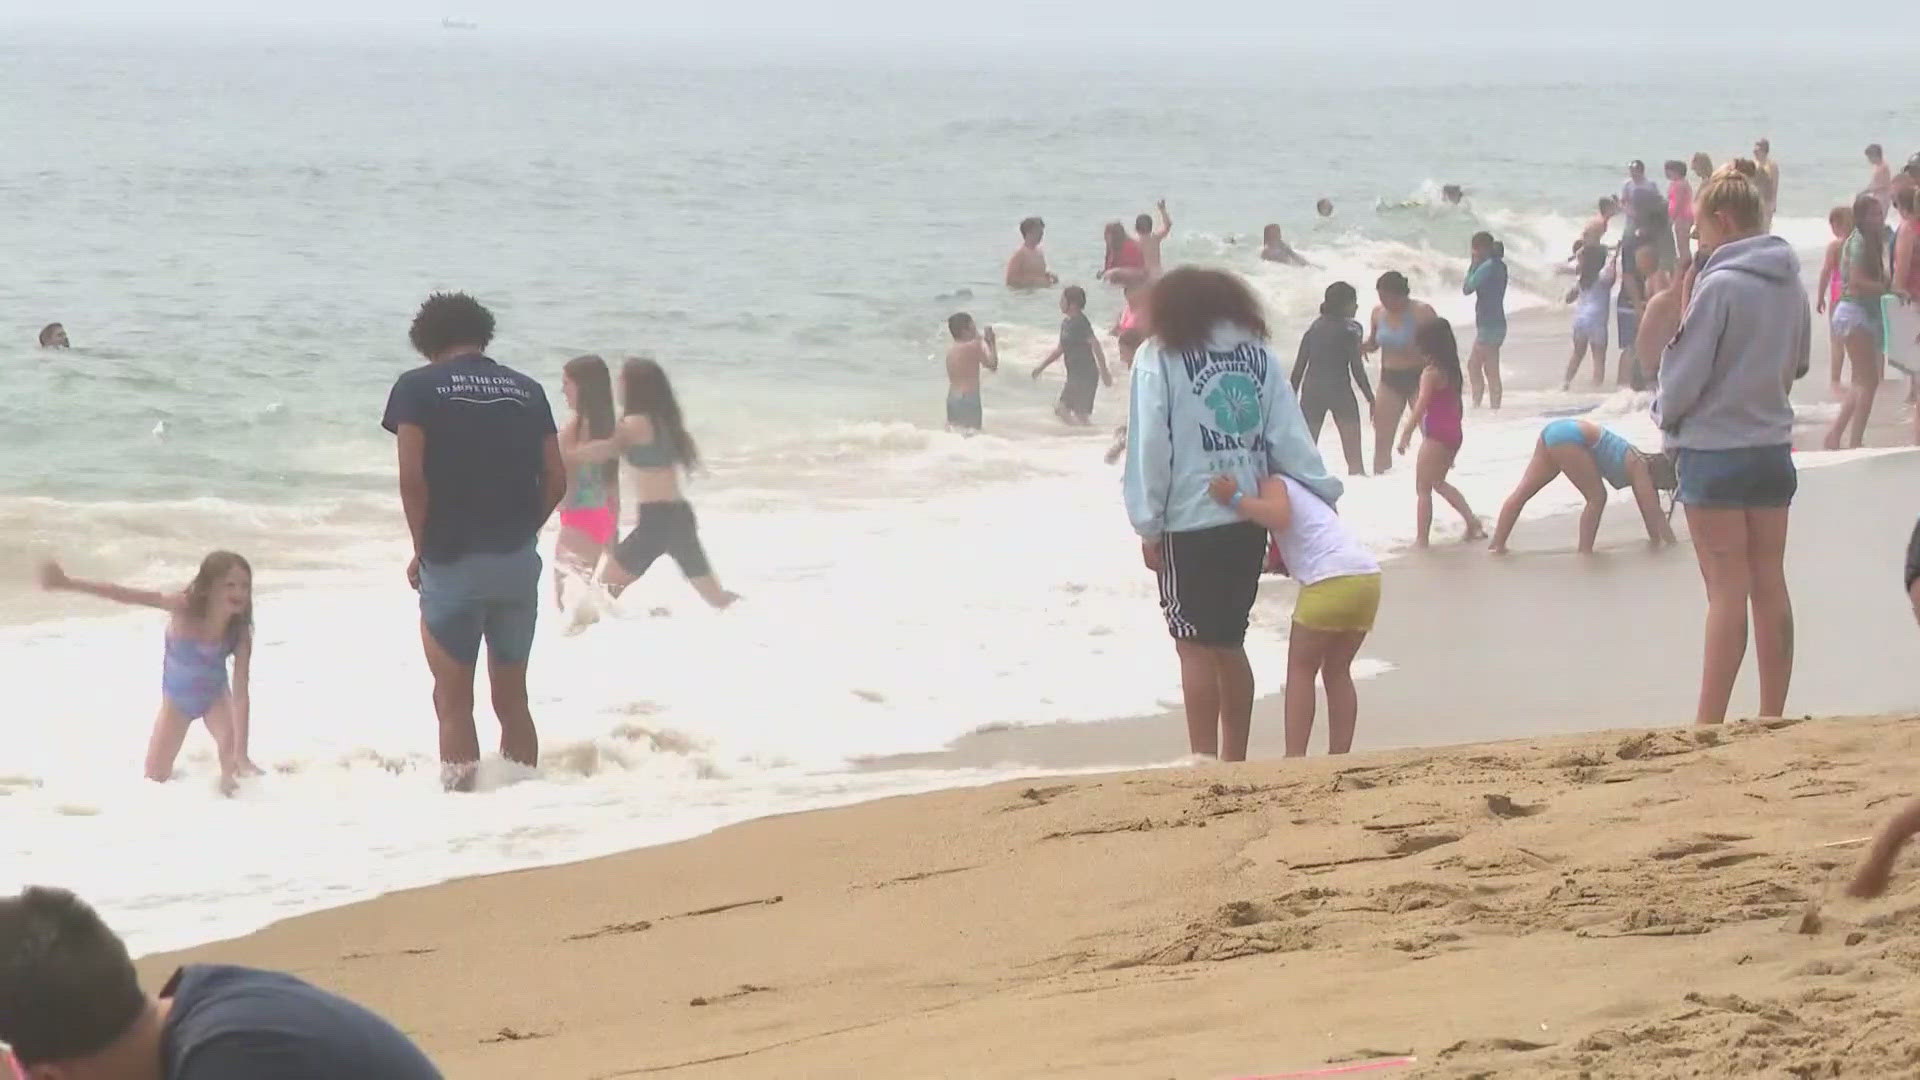 According to the Old Orchard Beach Fire Department, the children were caught in the rip current near the pier but lifeguards jumped into action to pull them out.